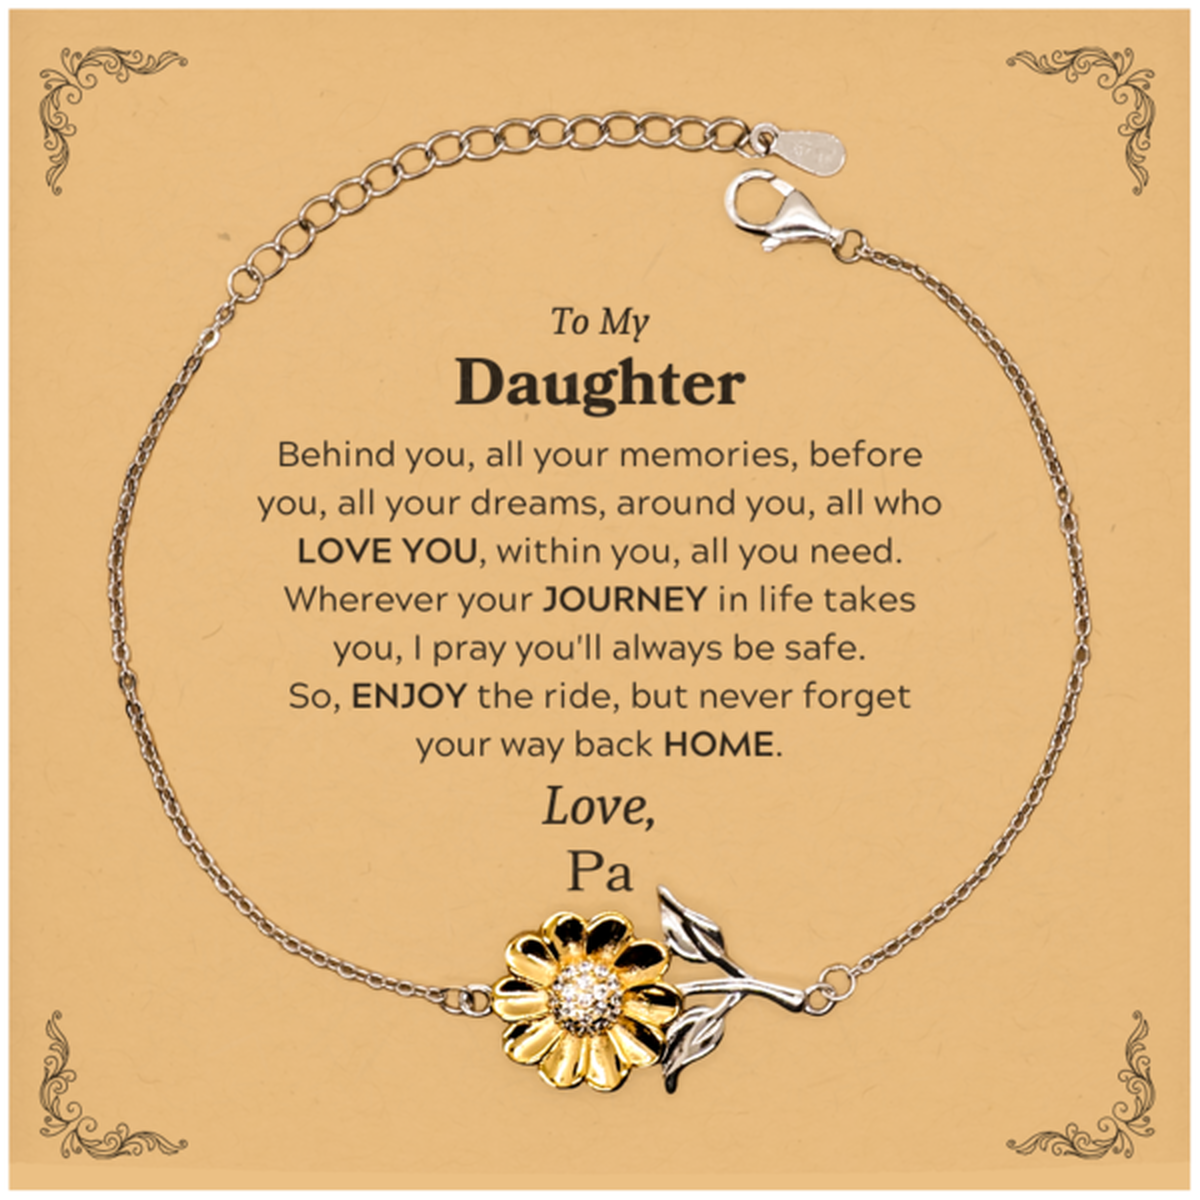 To My Daughter Graduation Gifts from Pa, Daughter Sunflower Bracelet Christmas Birthday Gifts for Daughter Behind you, all your memories, before you, all your dreams. Love, Pa